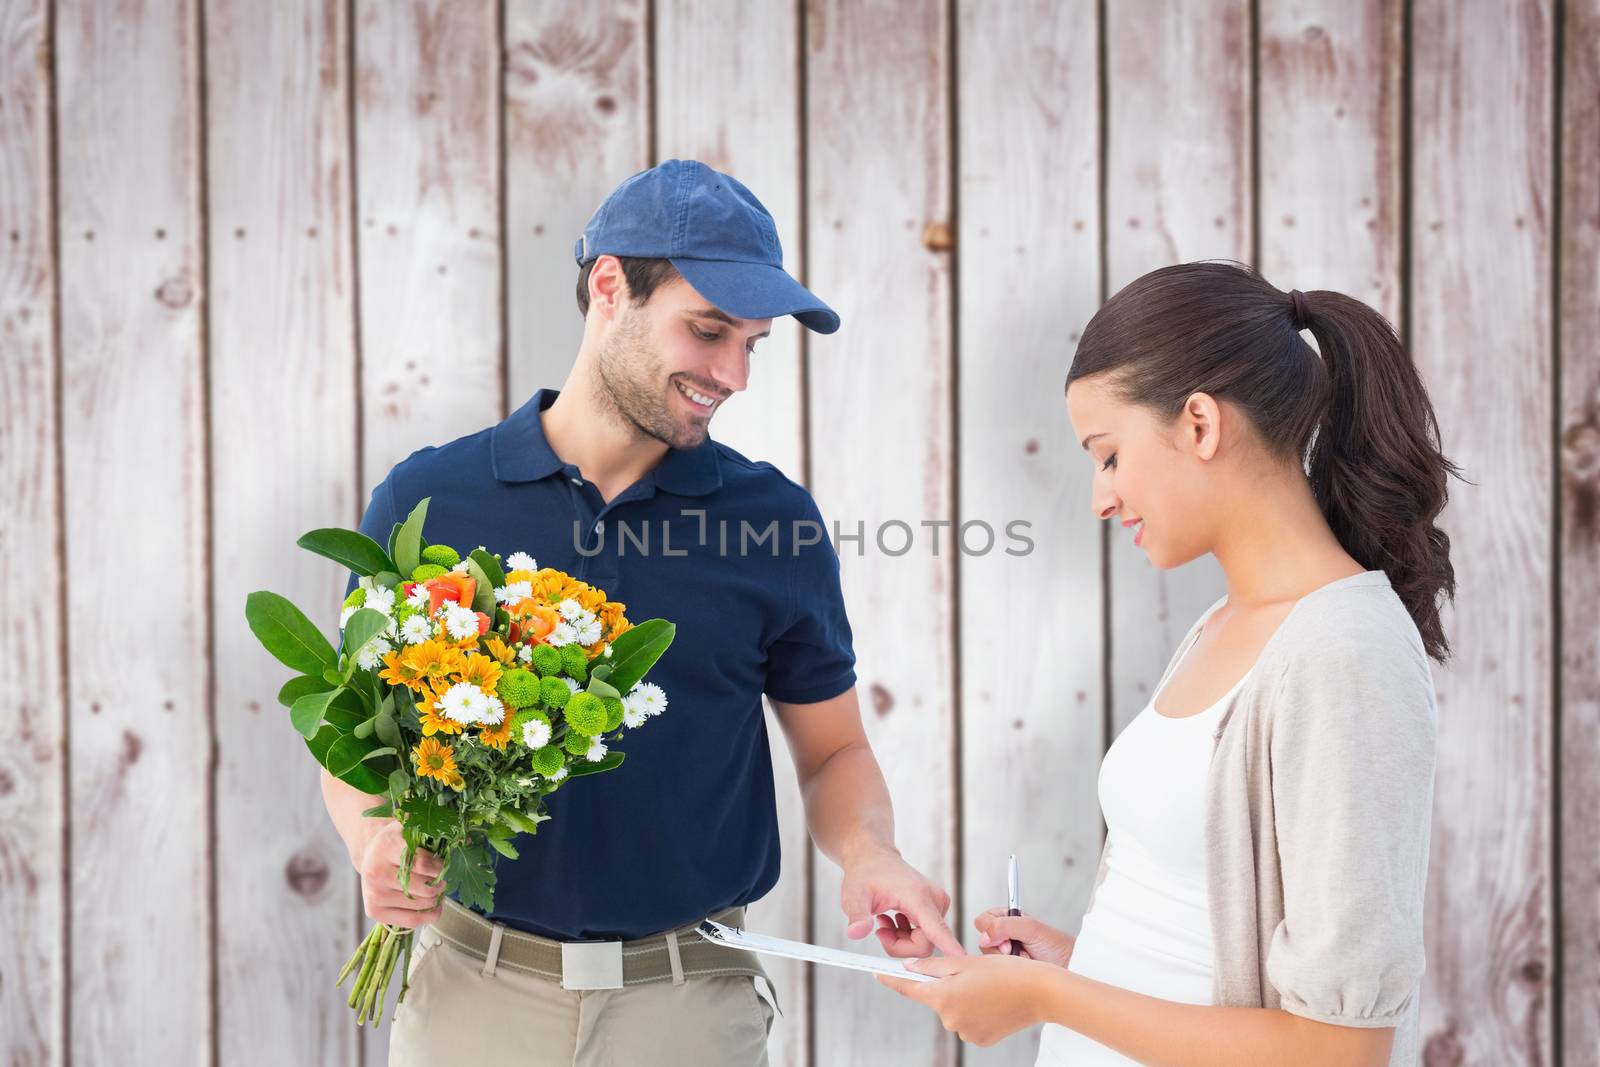 Happy flower delivery man with customer against wooden planks